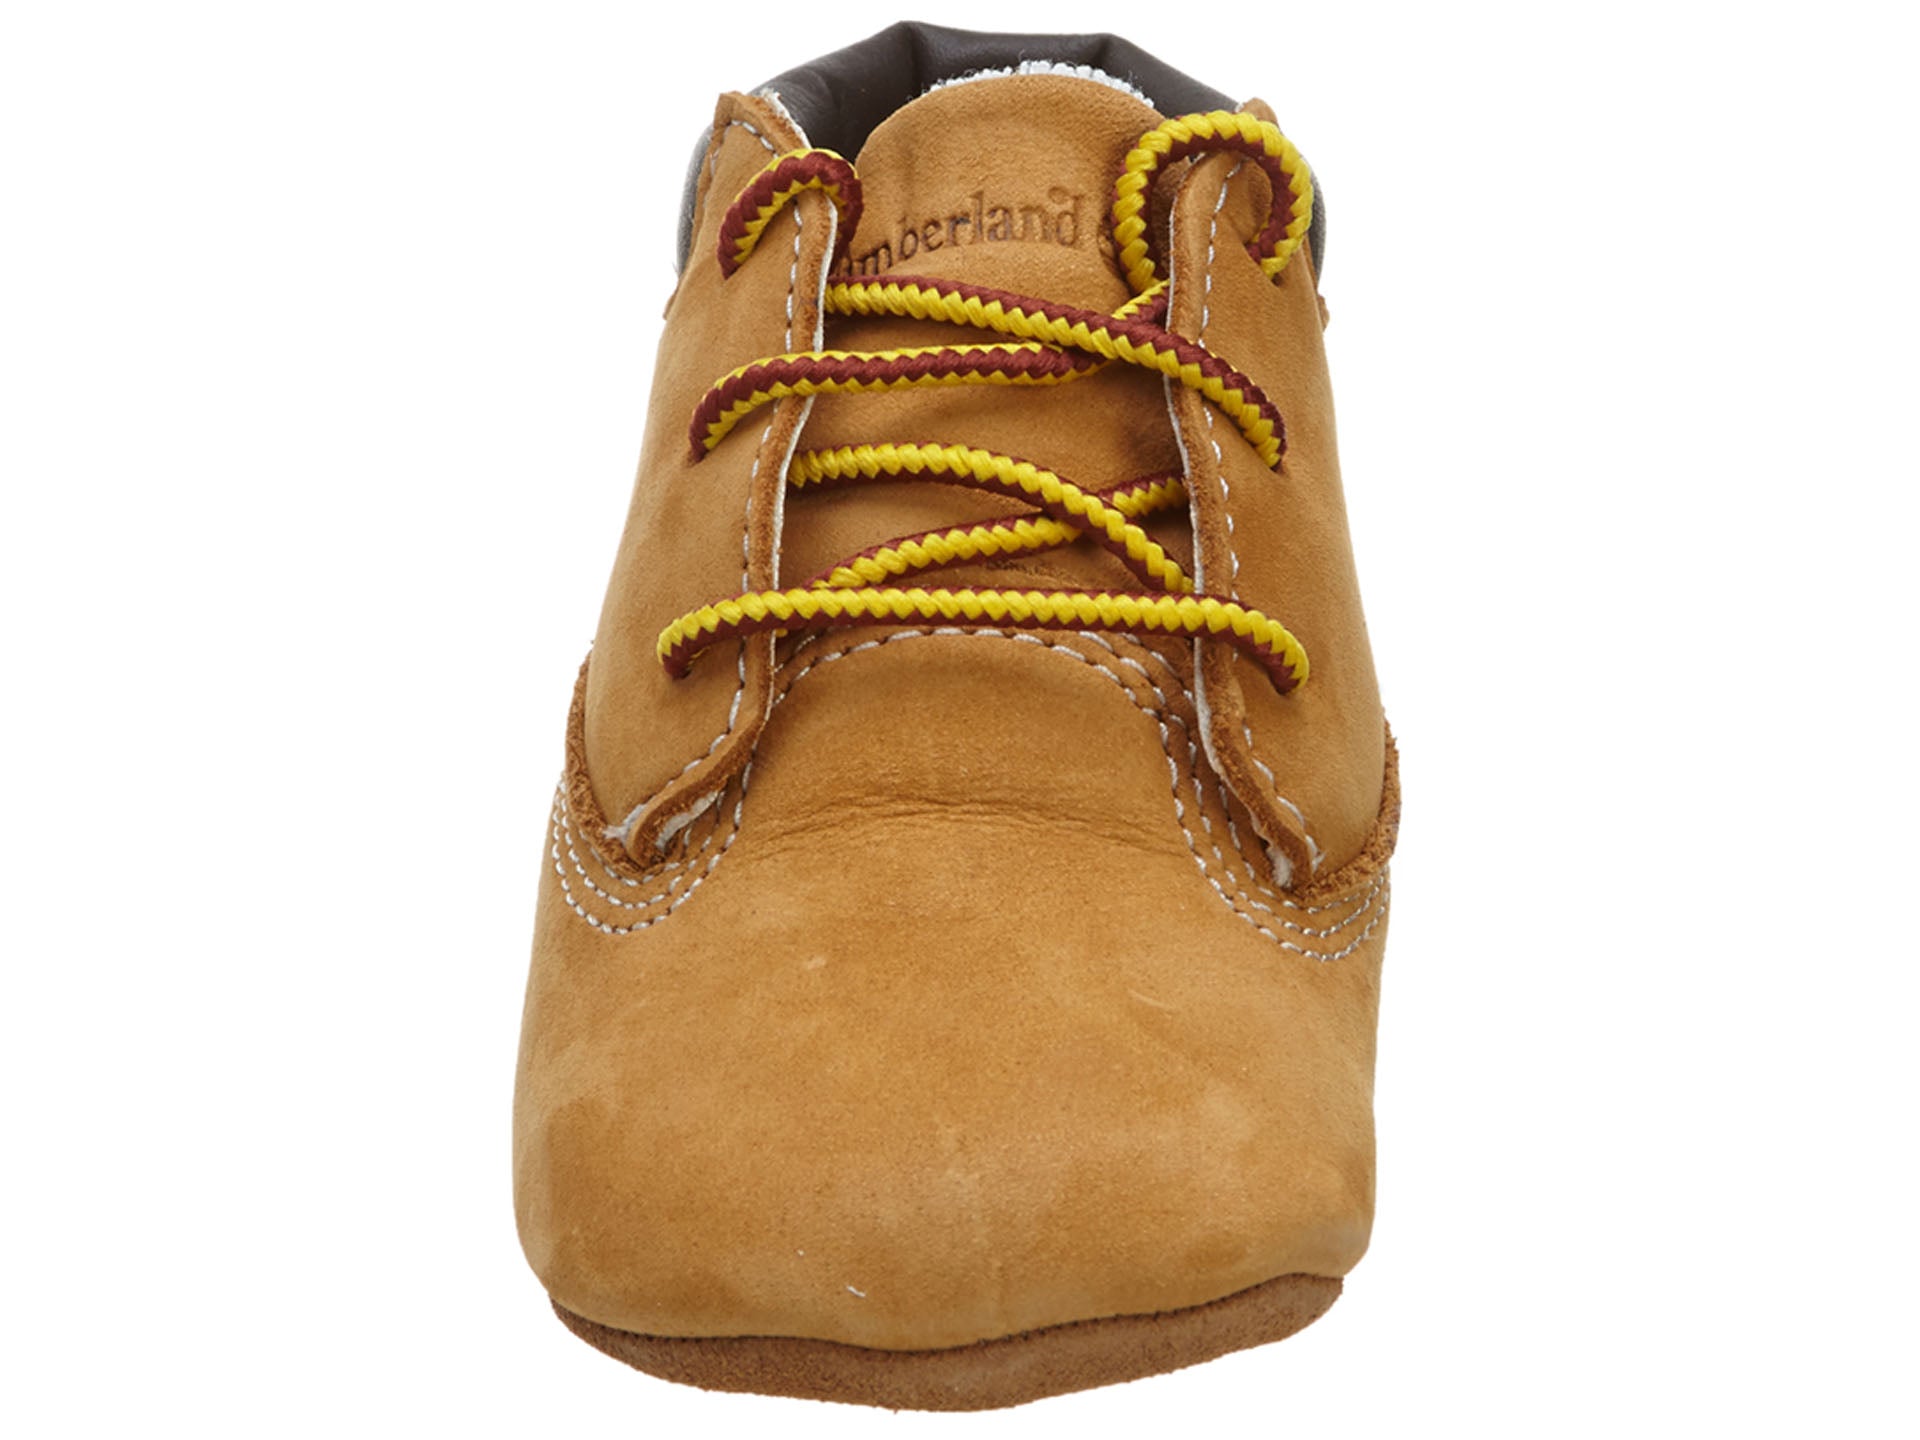 Timberland Hat Bootie Gift Set Crib Style : 9589r